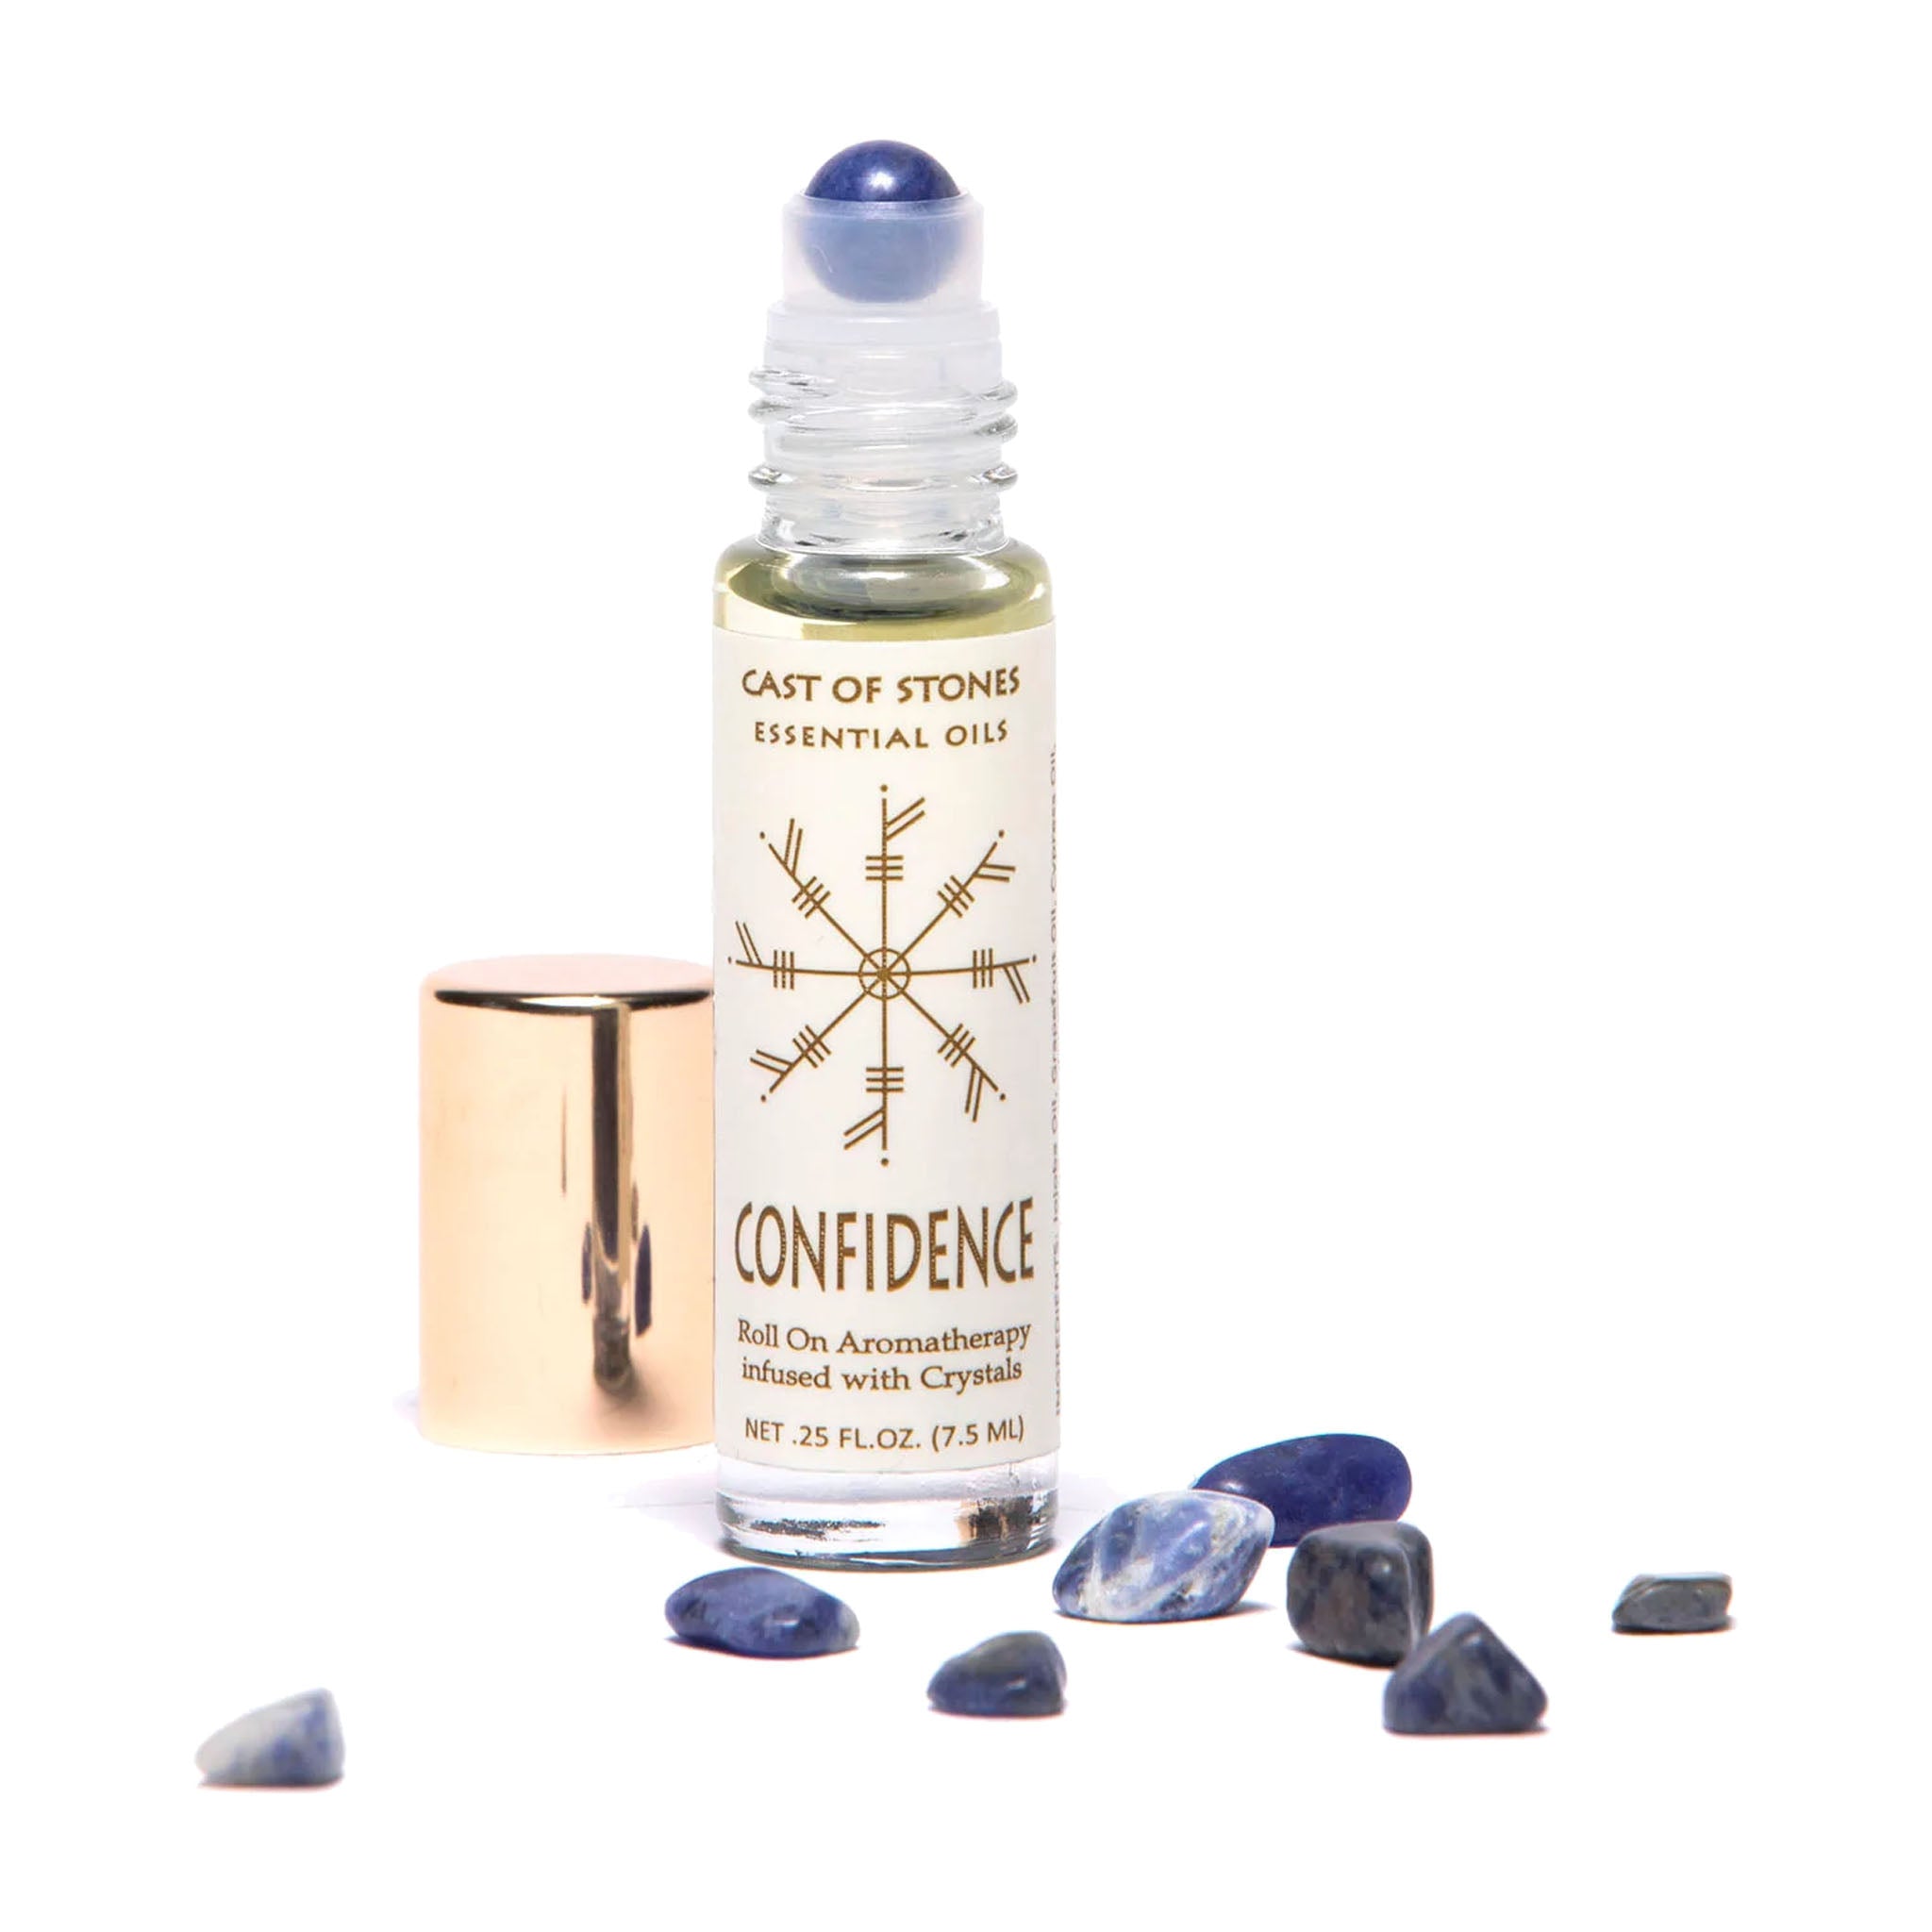 Confidence Roll-On - Essential Oil Aromatherapy with Sodalite Crystals